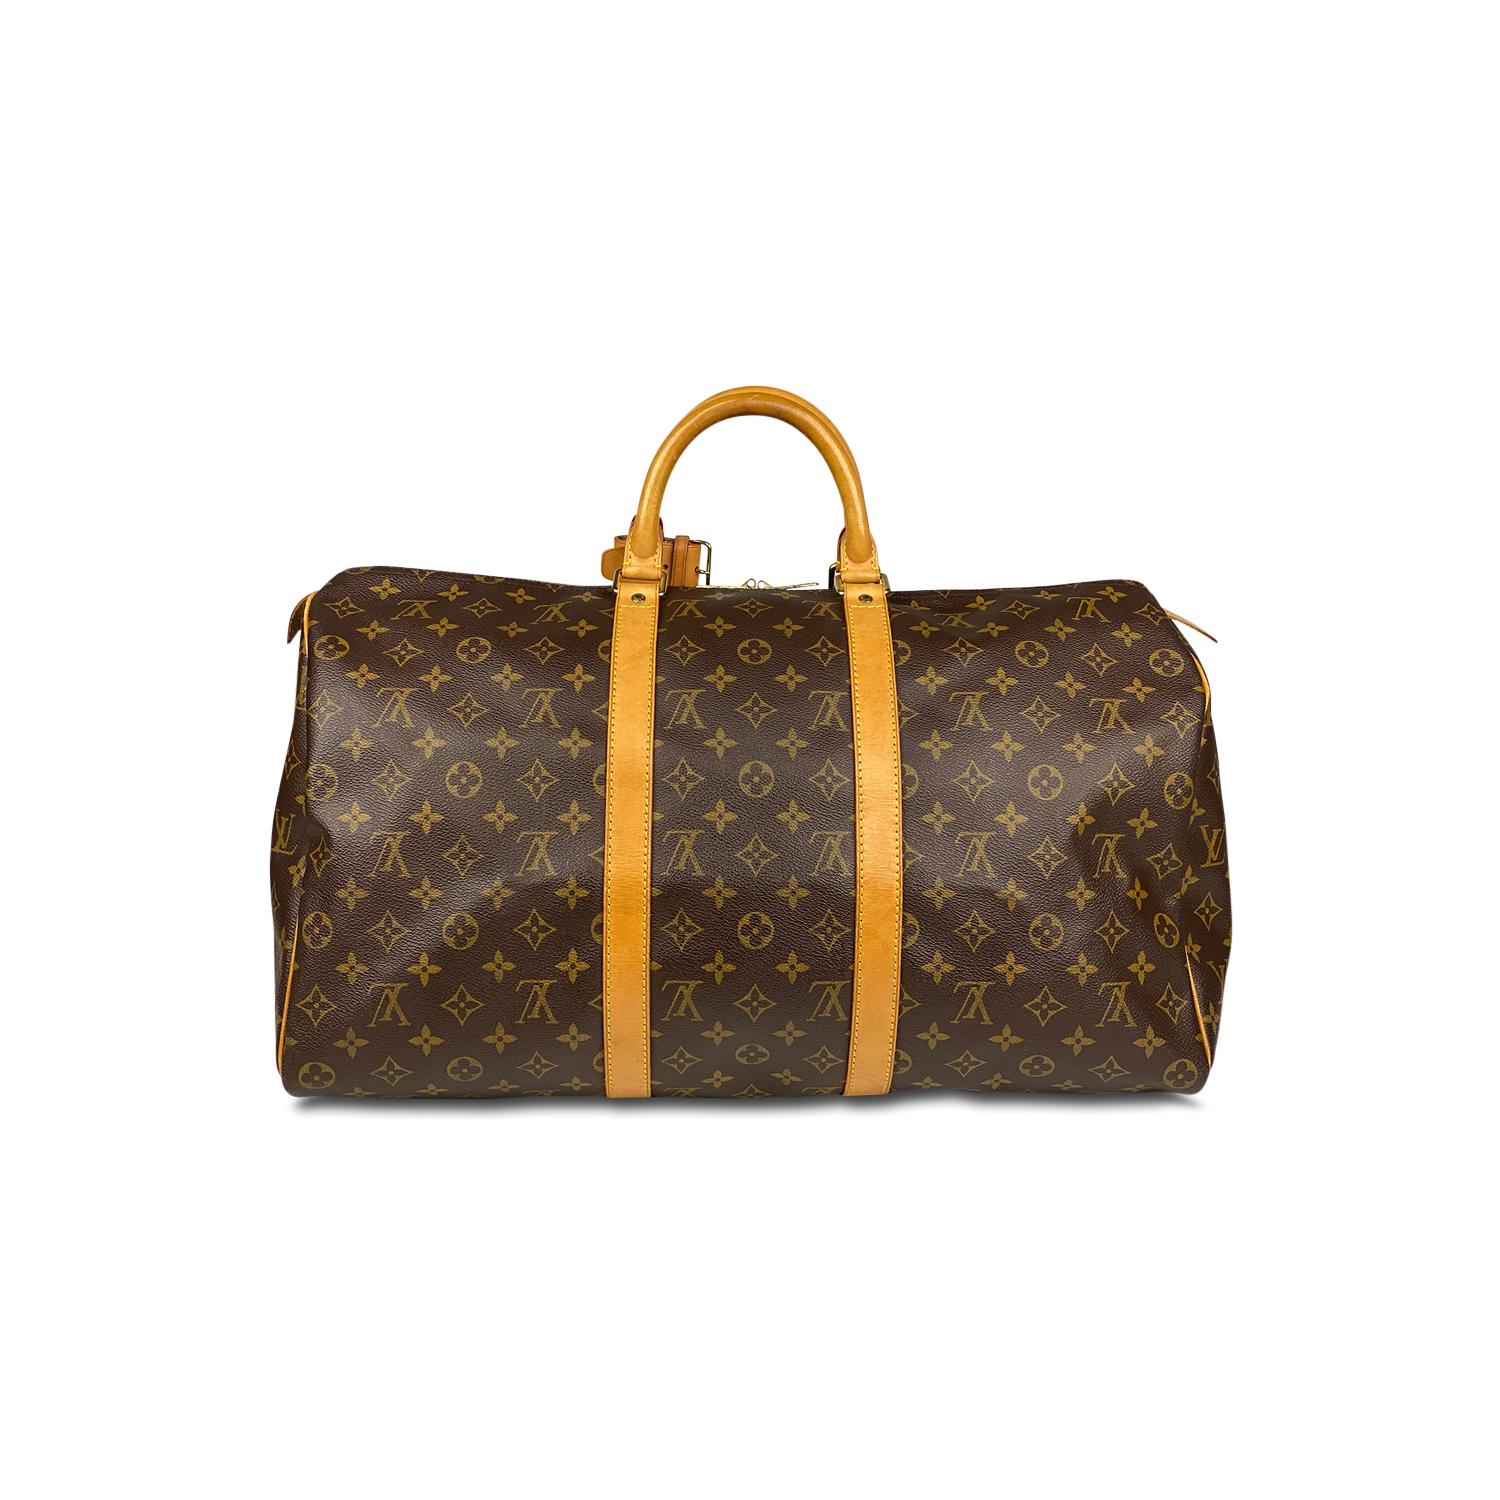 Louis Vuitton Monogram Keepall 50 Weekend Bag In Good Condition For Sale In Sundbyberg, SE